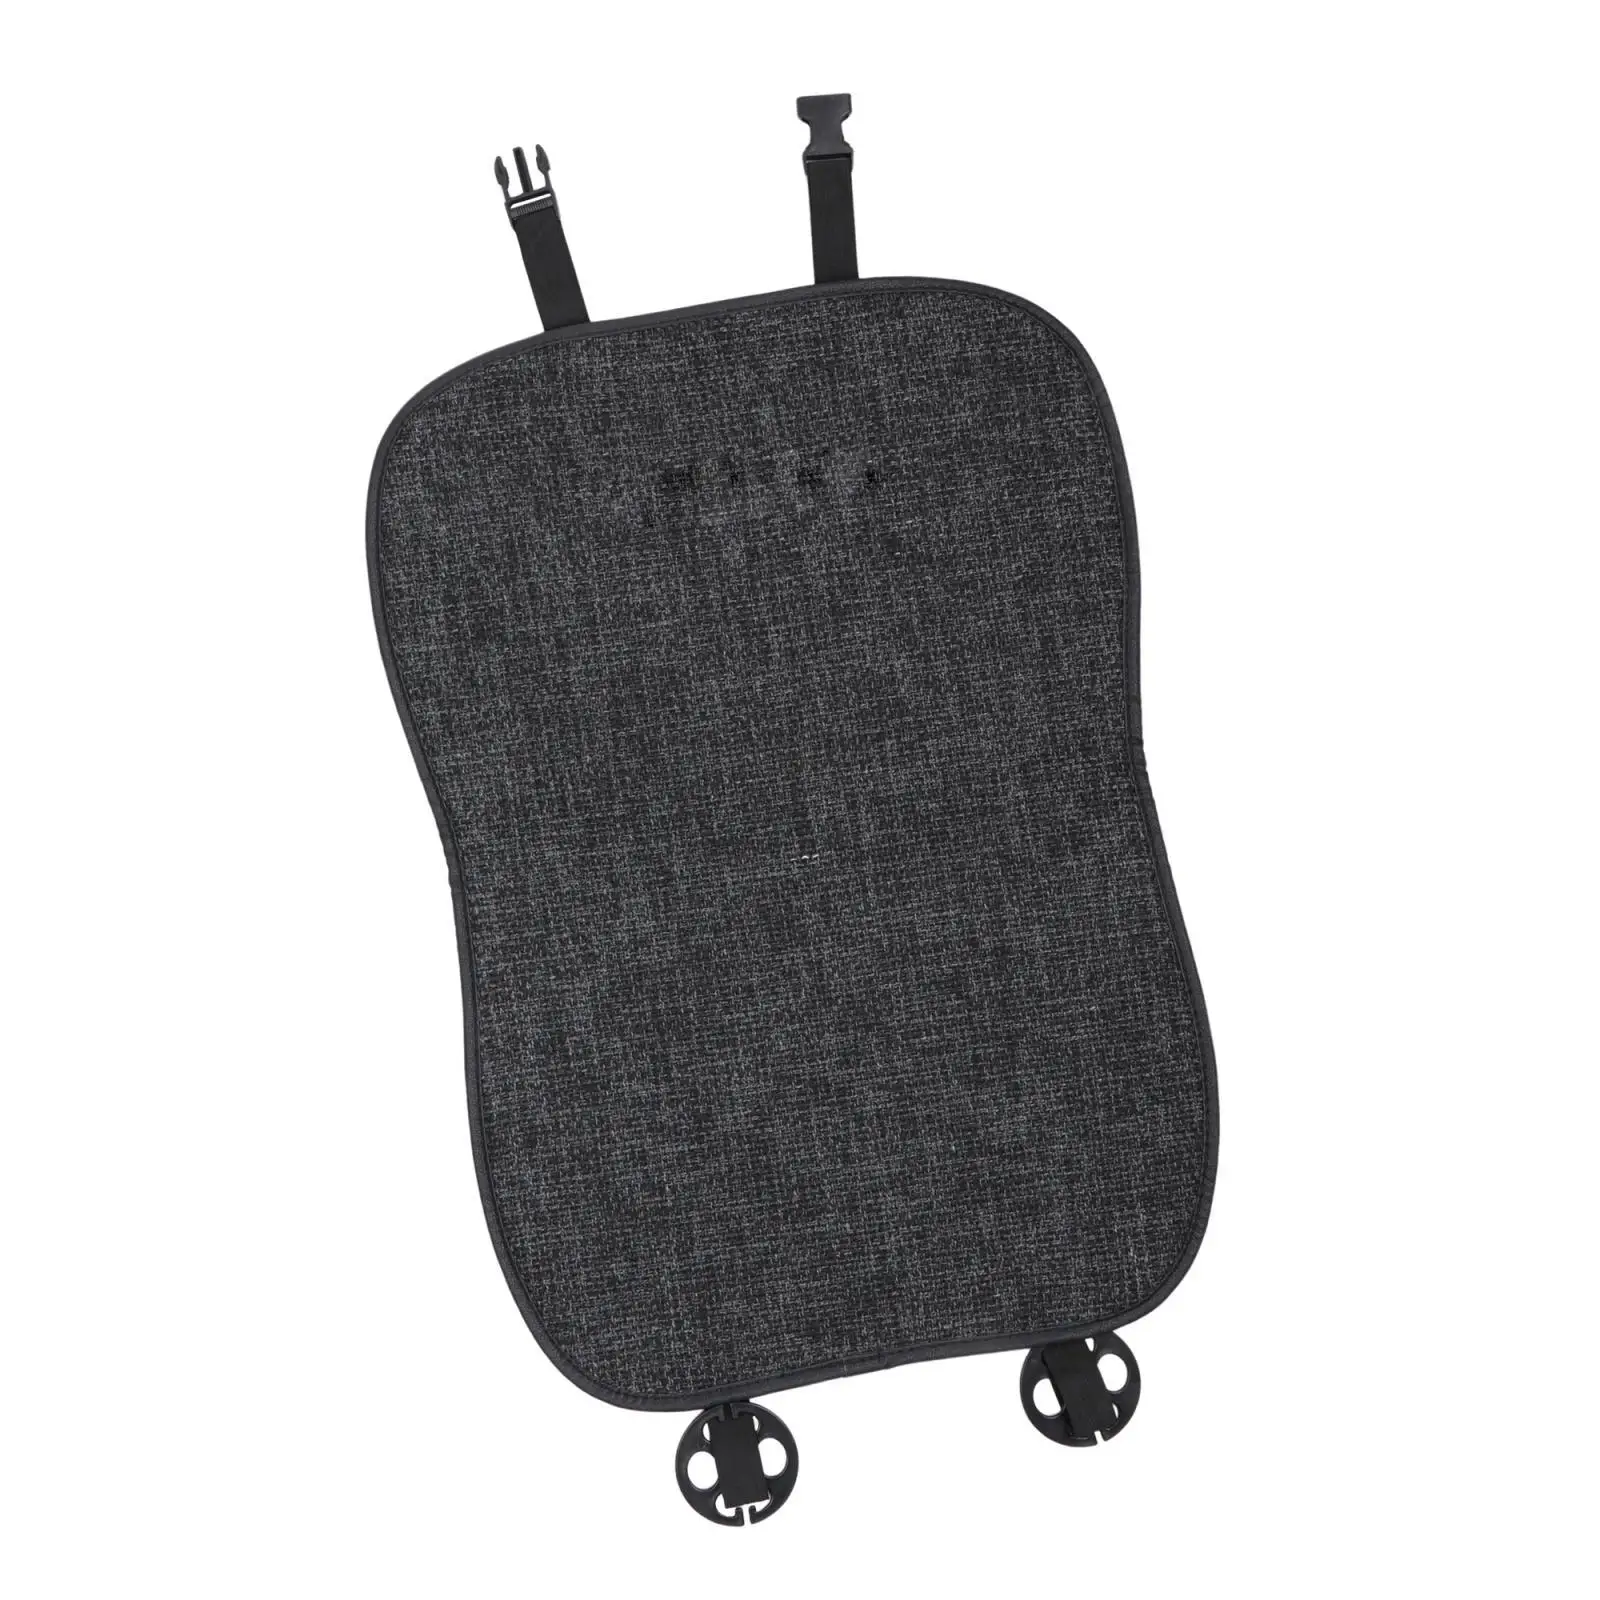 Vehicle Car Seat Cover Cushion for Byd Atto 3 Available in All Seasons Grey Accessories Durable